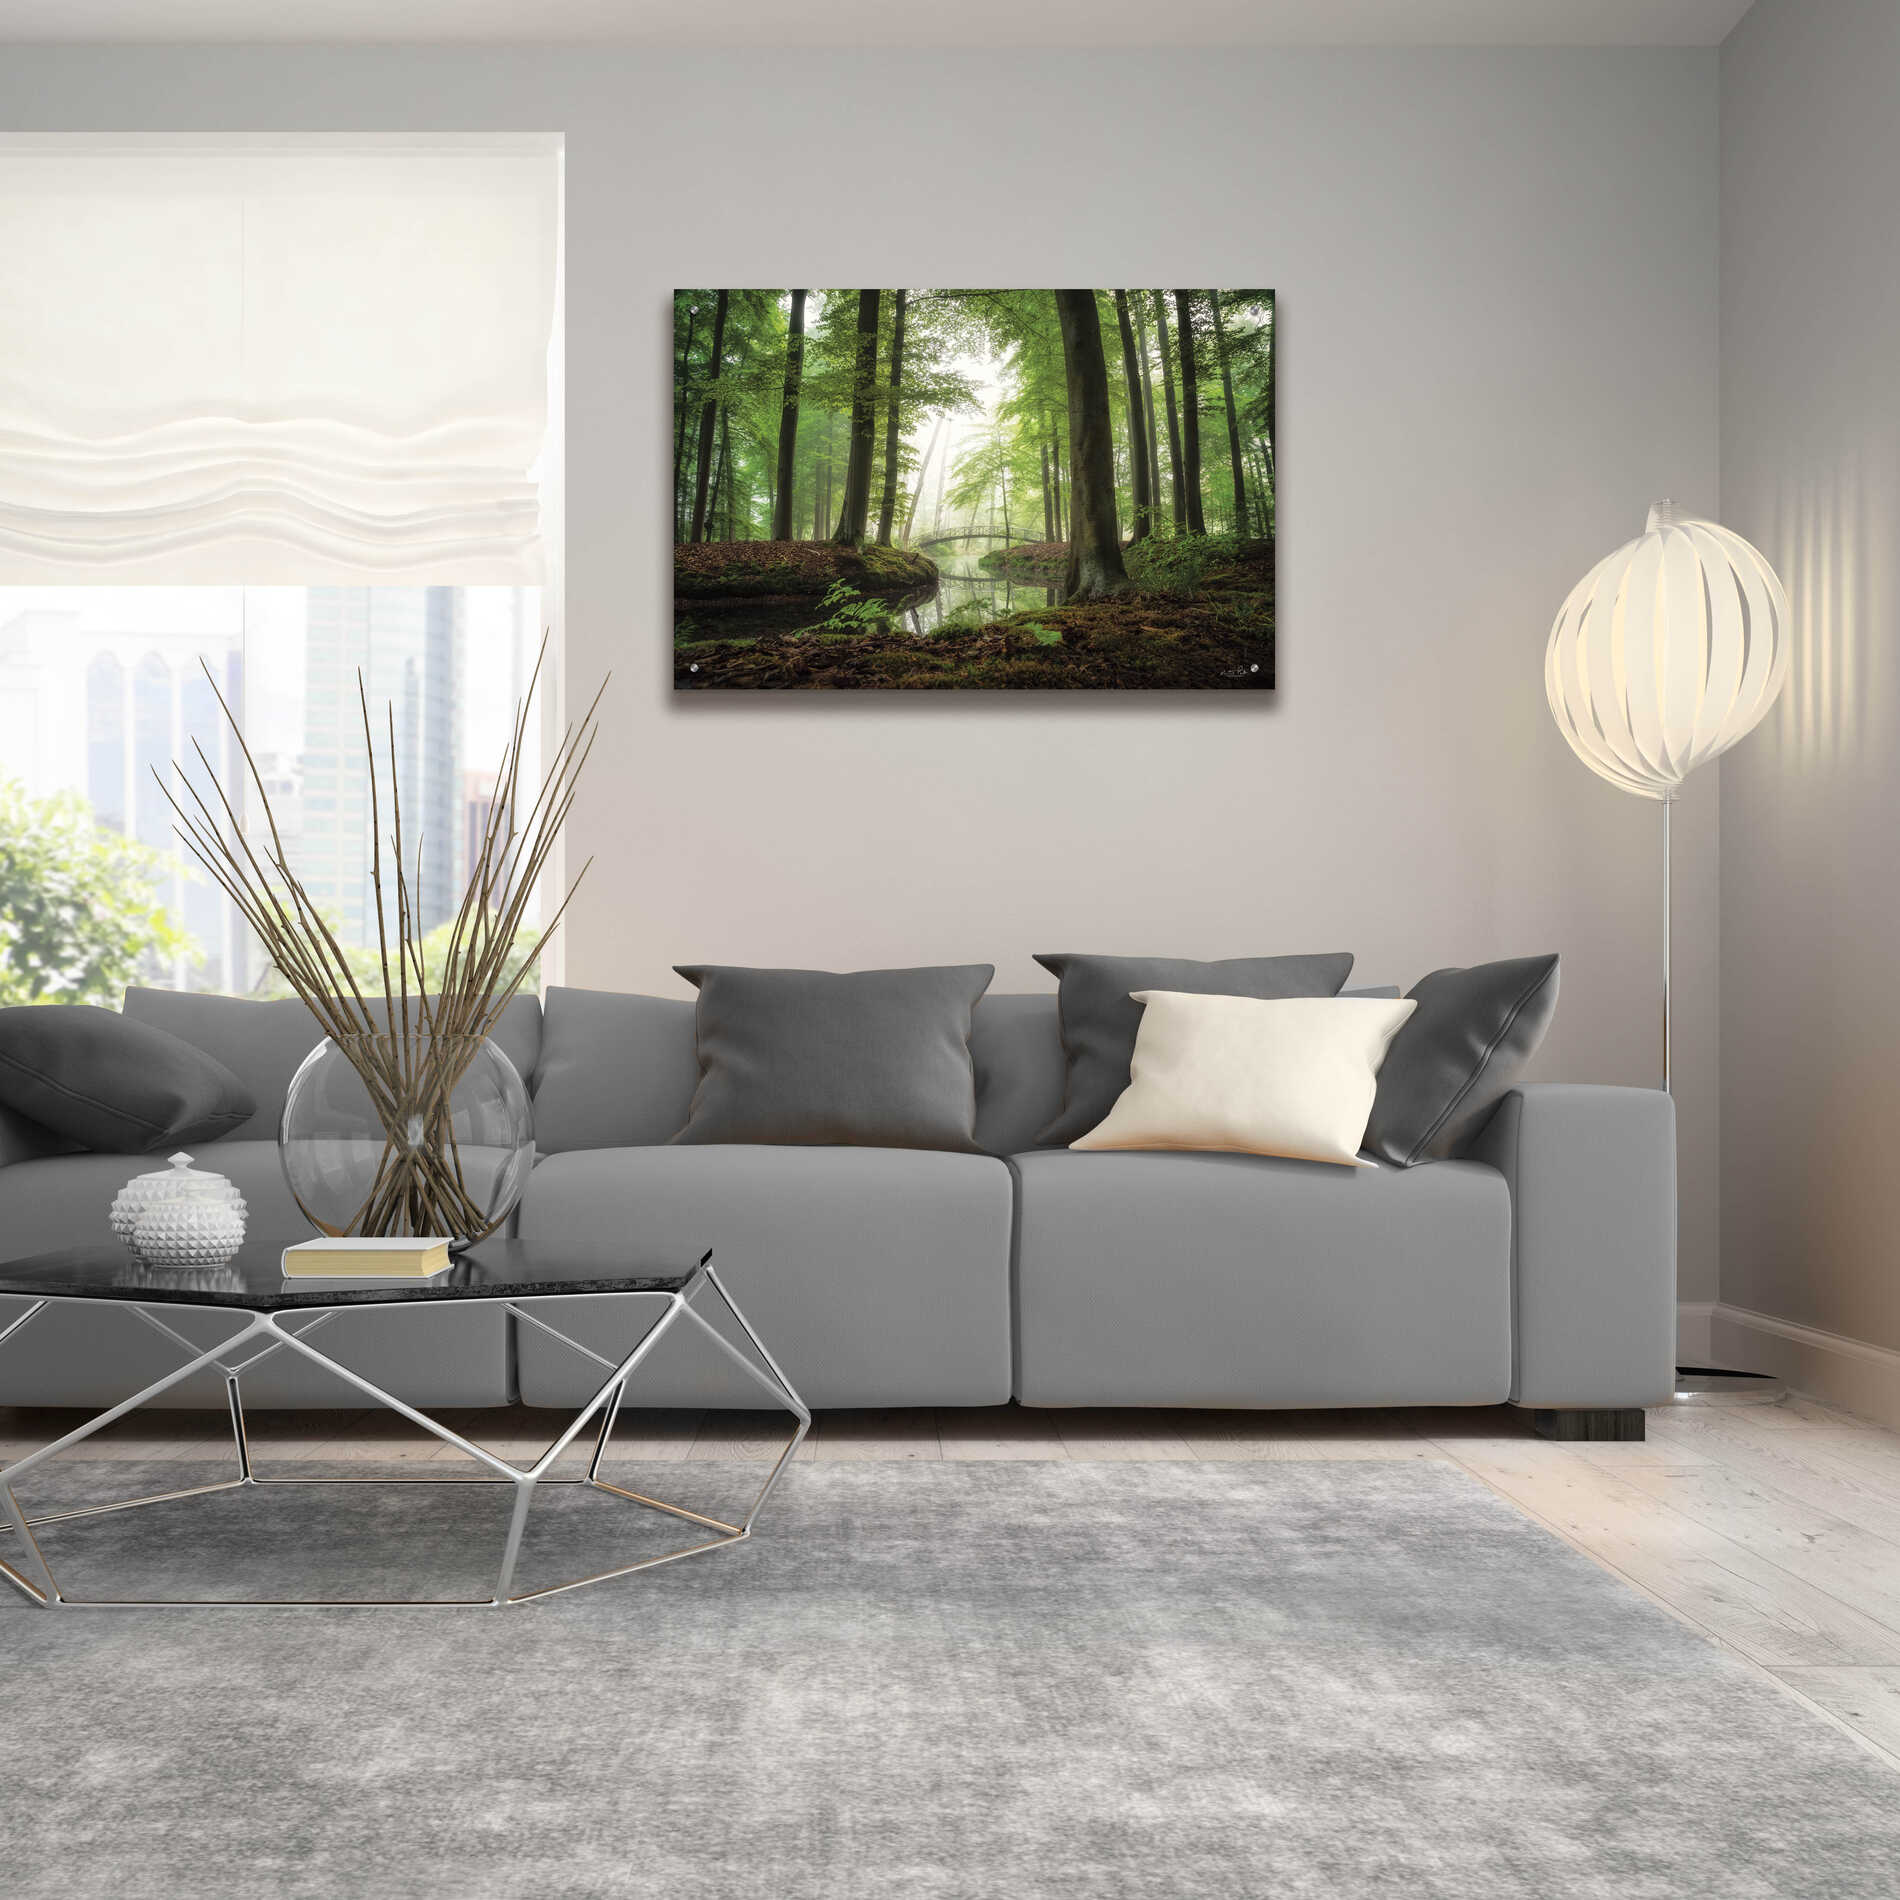 Epic Art 'On a Beautiful Morning' by Martin Podt, Acrylic Glass Wall Art,36x24